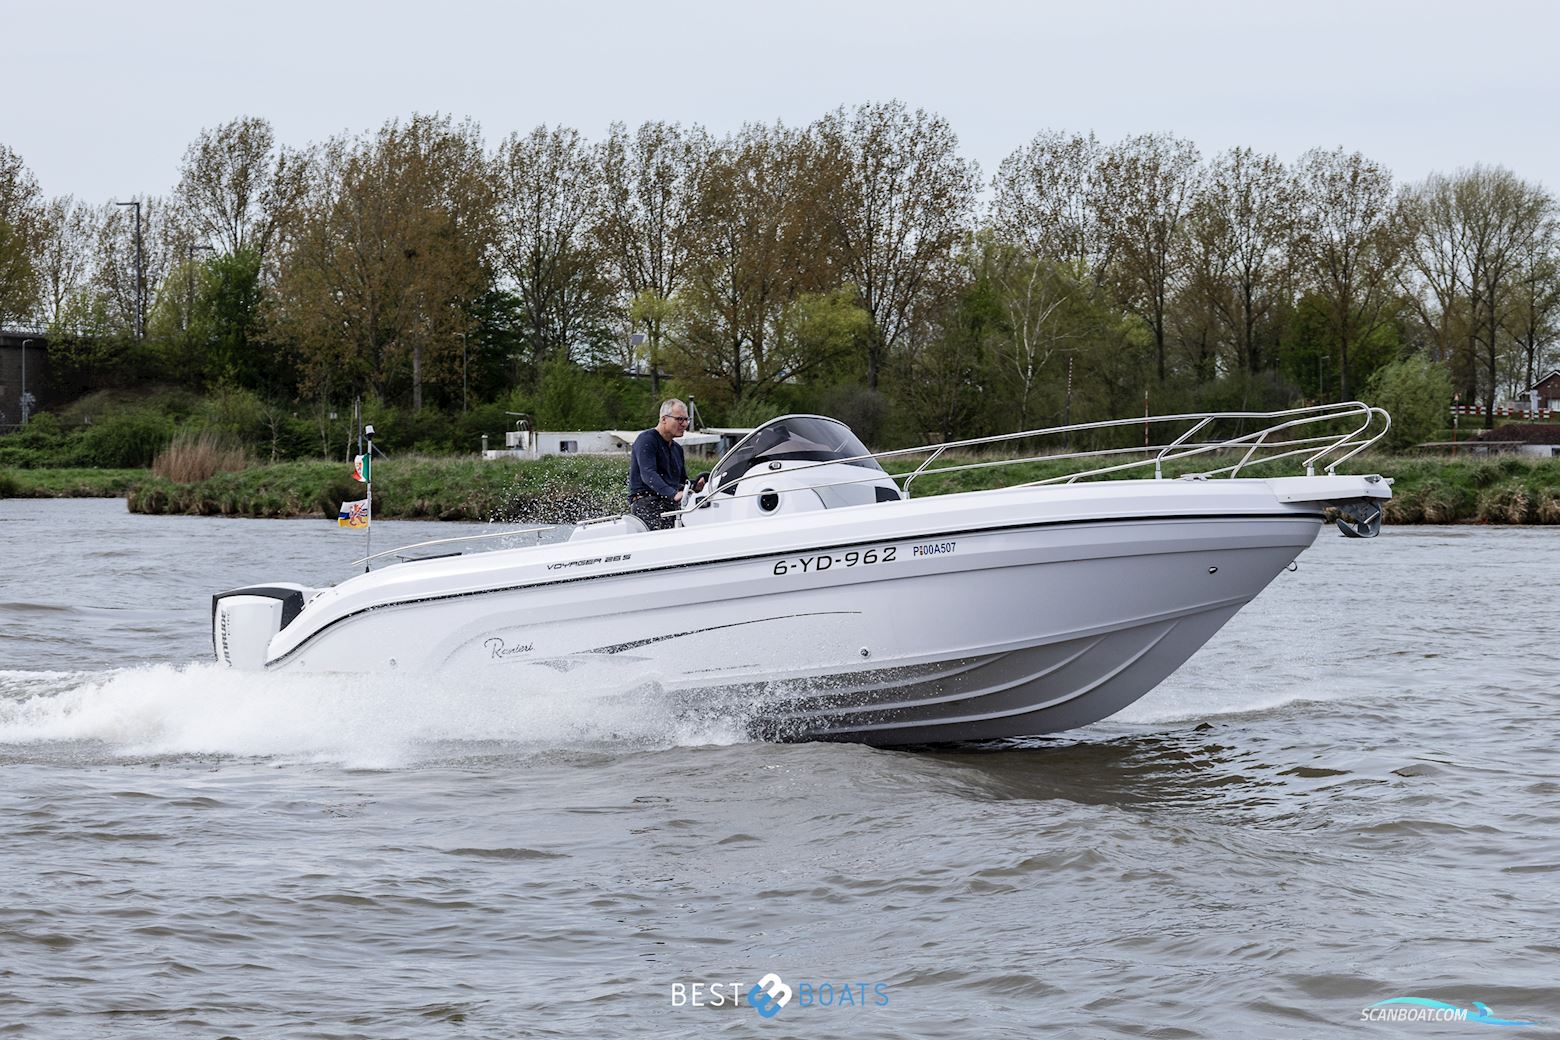 Ranieri Voyager 26S Motor boat 2020, with Evinrude engine, The Netherlands